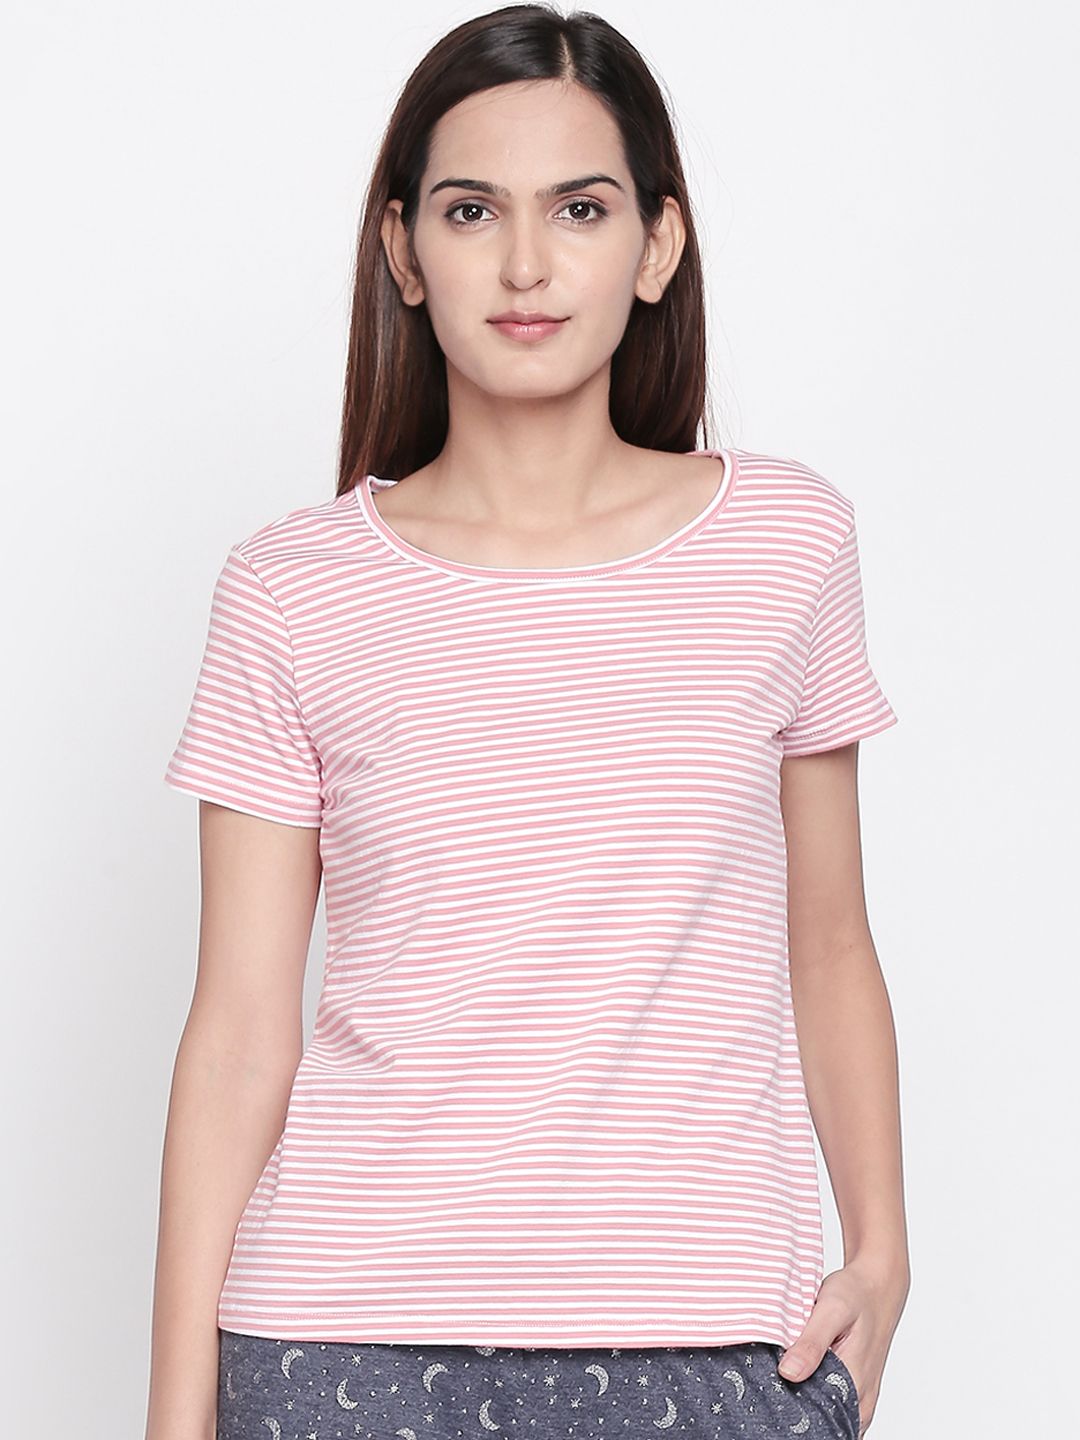 Dreamz by Pantaloons Women Pink Striped Lounge tshirt Price in India